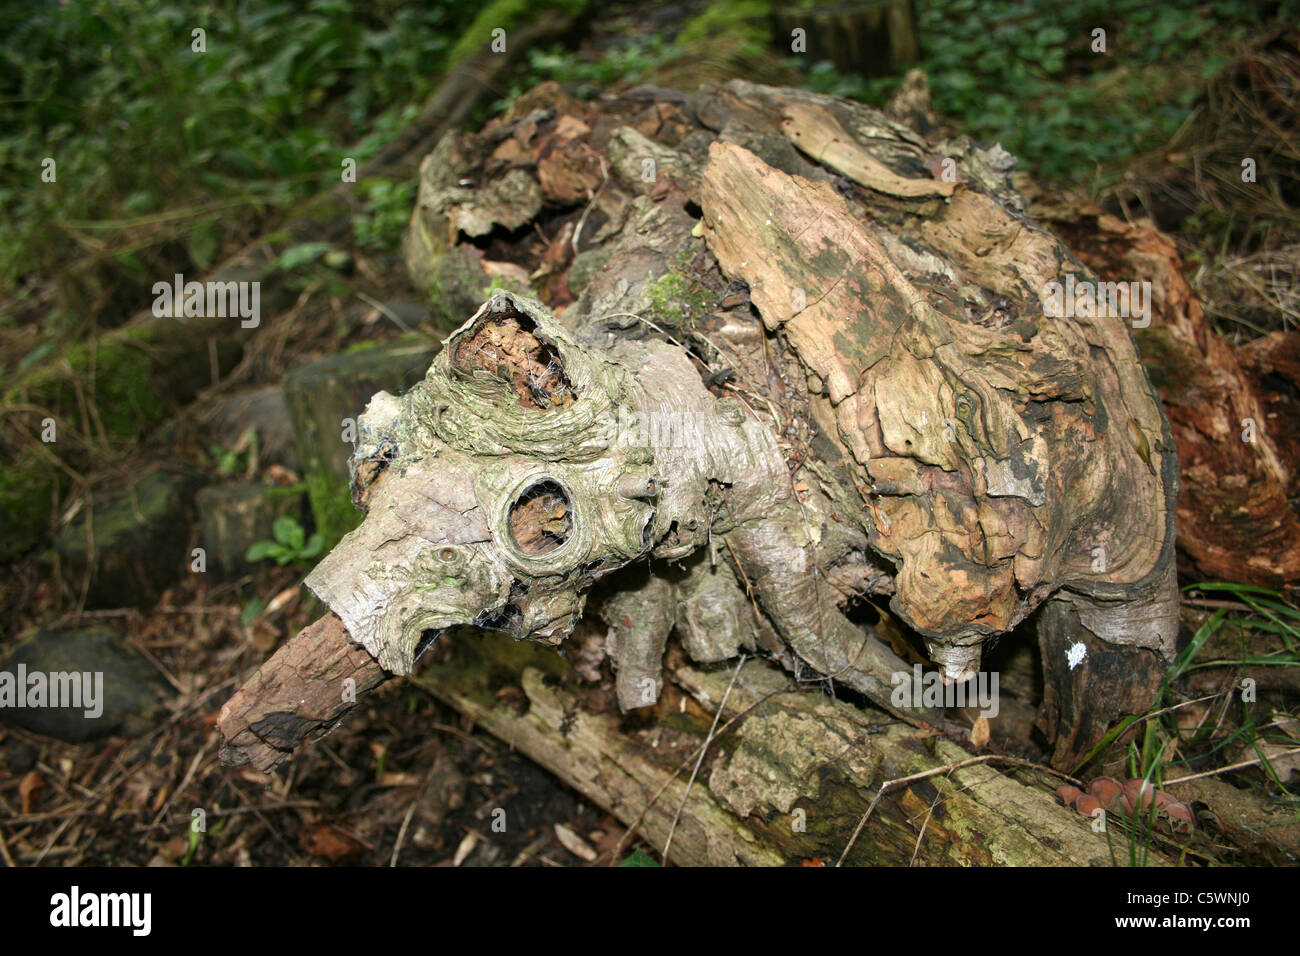 Gnarled Old Wood In The Shape of an Anteater Stock Photo